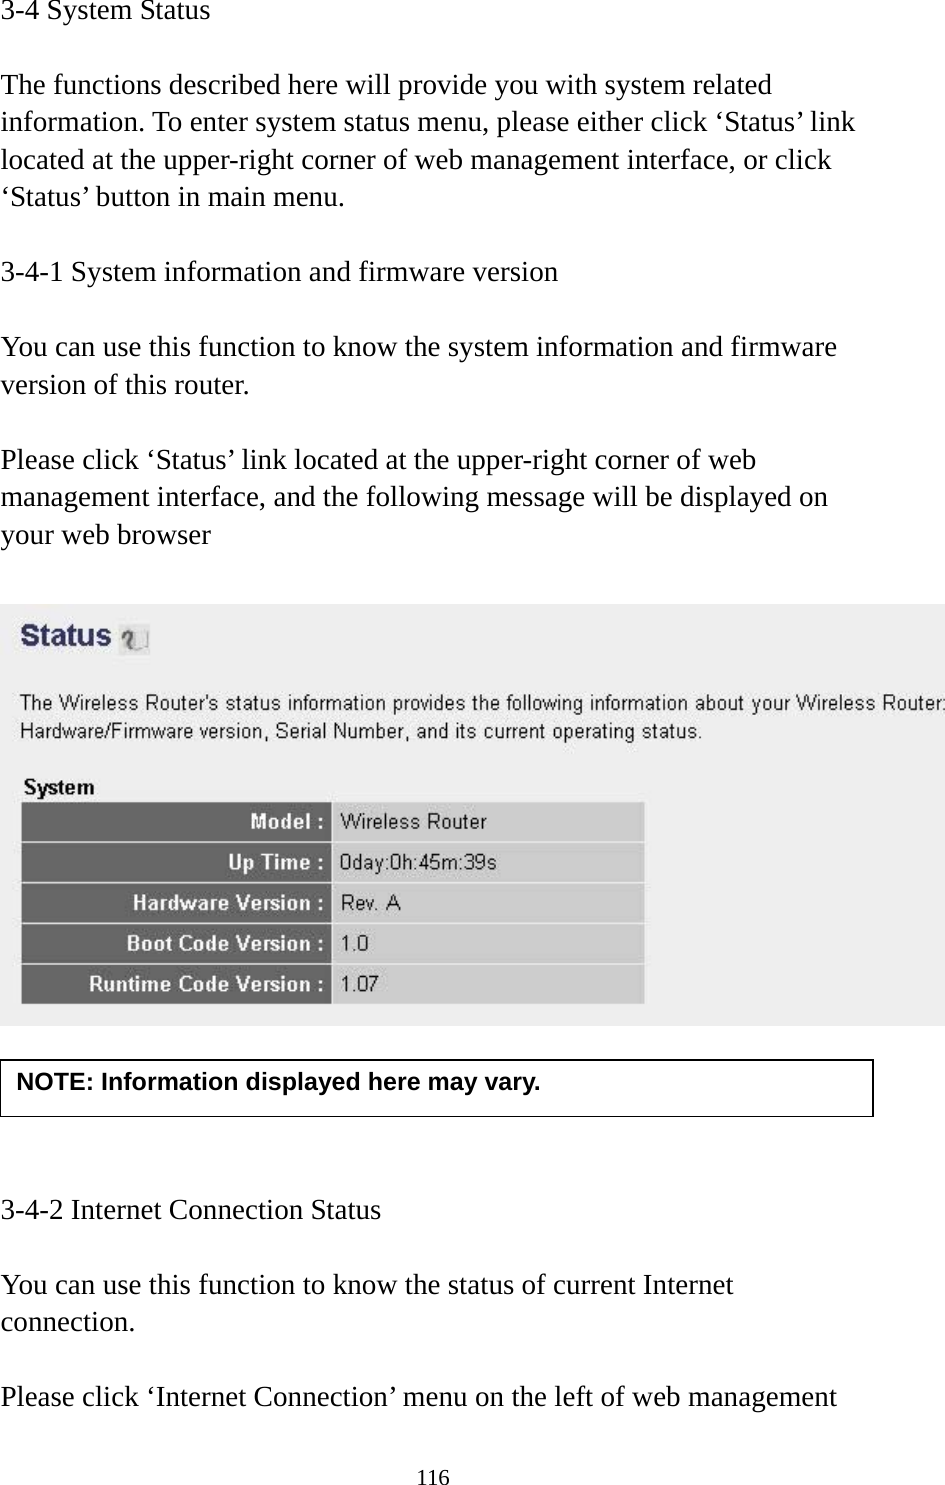 116 3-4 System Status  The functions described here will provide you with system related information. To enter system status menu, please either click ‘Status’ link located at the upper-right corner of web management interface, or click ‘Status’ button in main menu.  3-4-1 System information and firmware version  You can use this function to know the system information and firmware version of this router.  Please click ‘Status’ link located at the upper-right corner of web management interface, and the following message will be displayed on your web browser       3-4-2 Internet Connection Status  You can use this function to know the status of current Internet connection.  Please click ‘Internet Connection’ menu on the left of web management NOTE: Information displayed here may vary. 